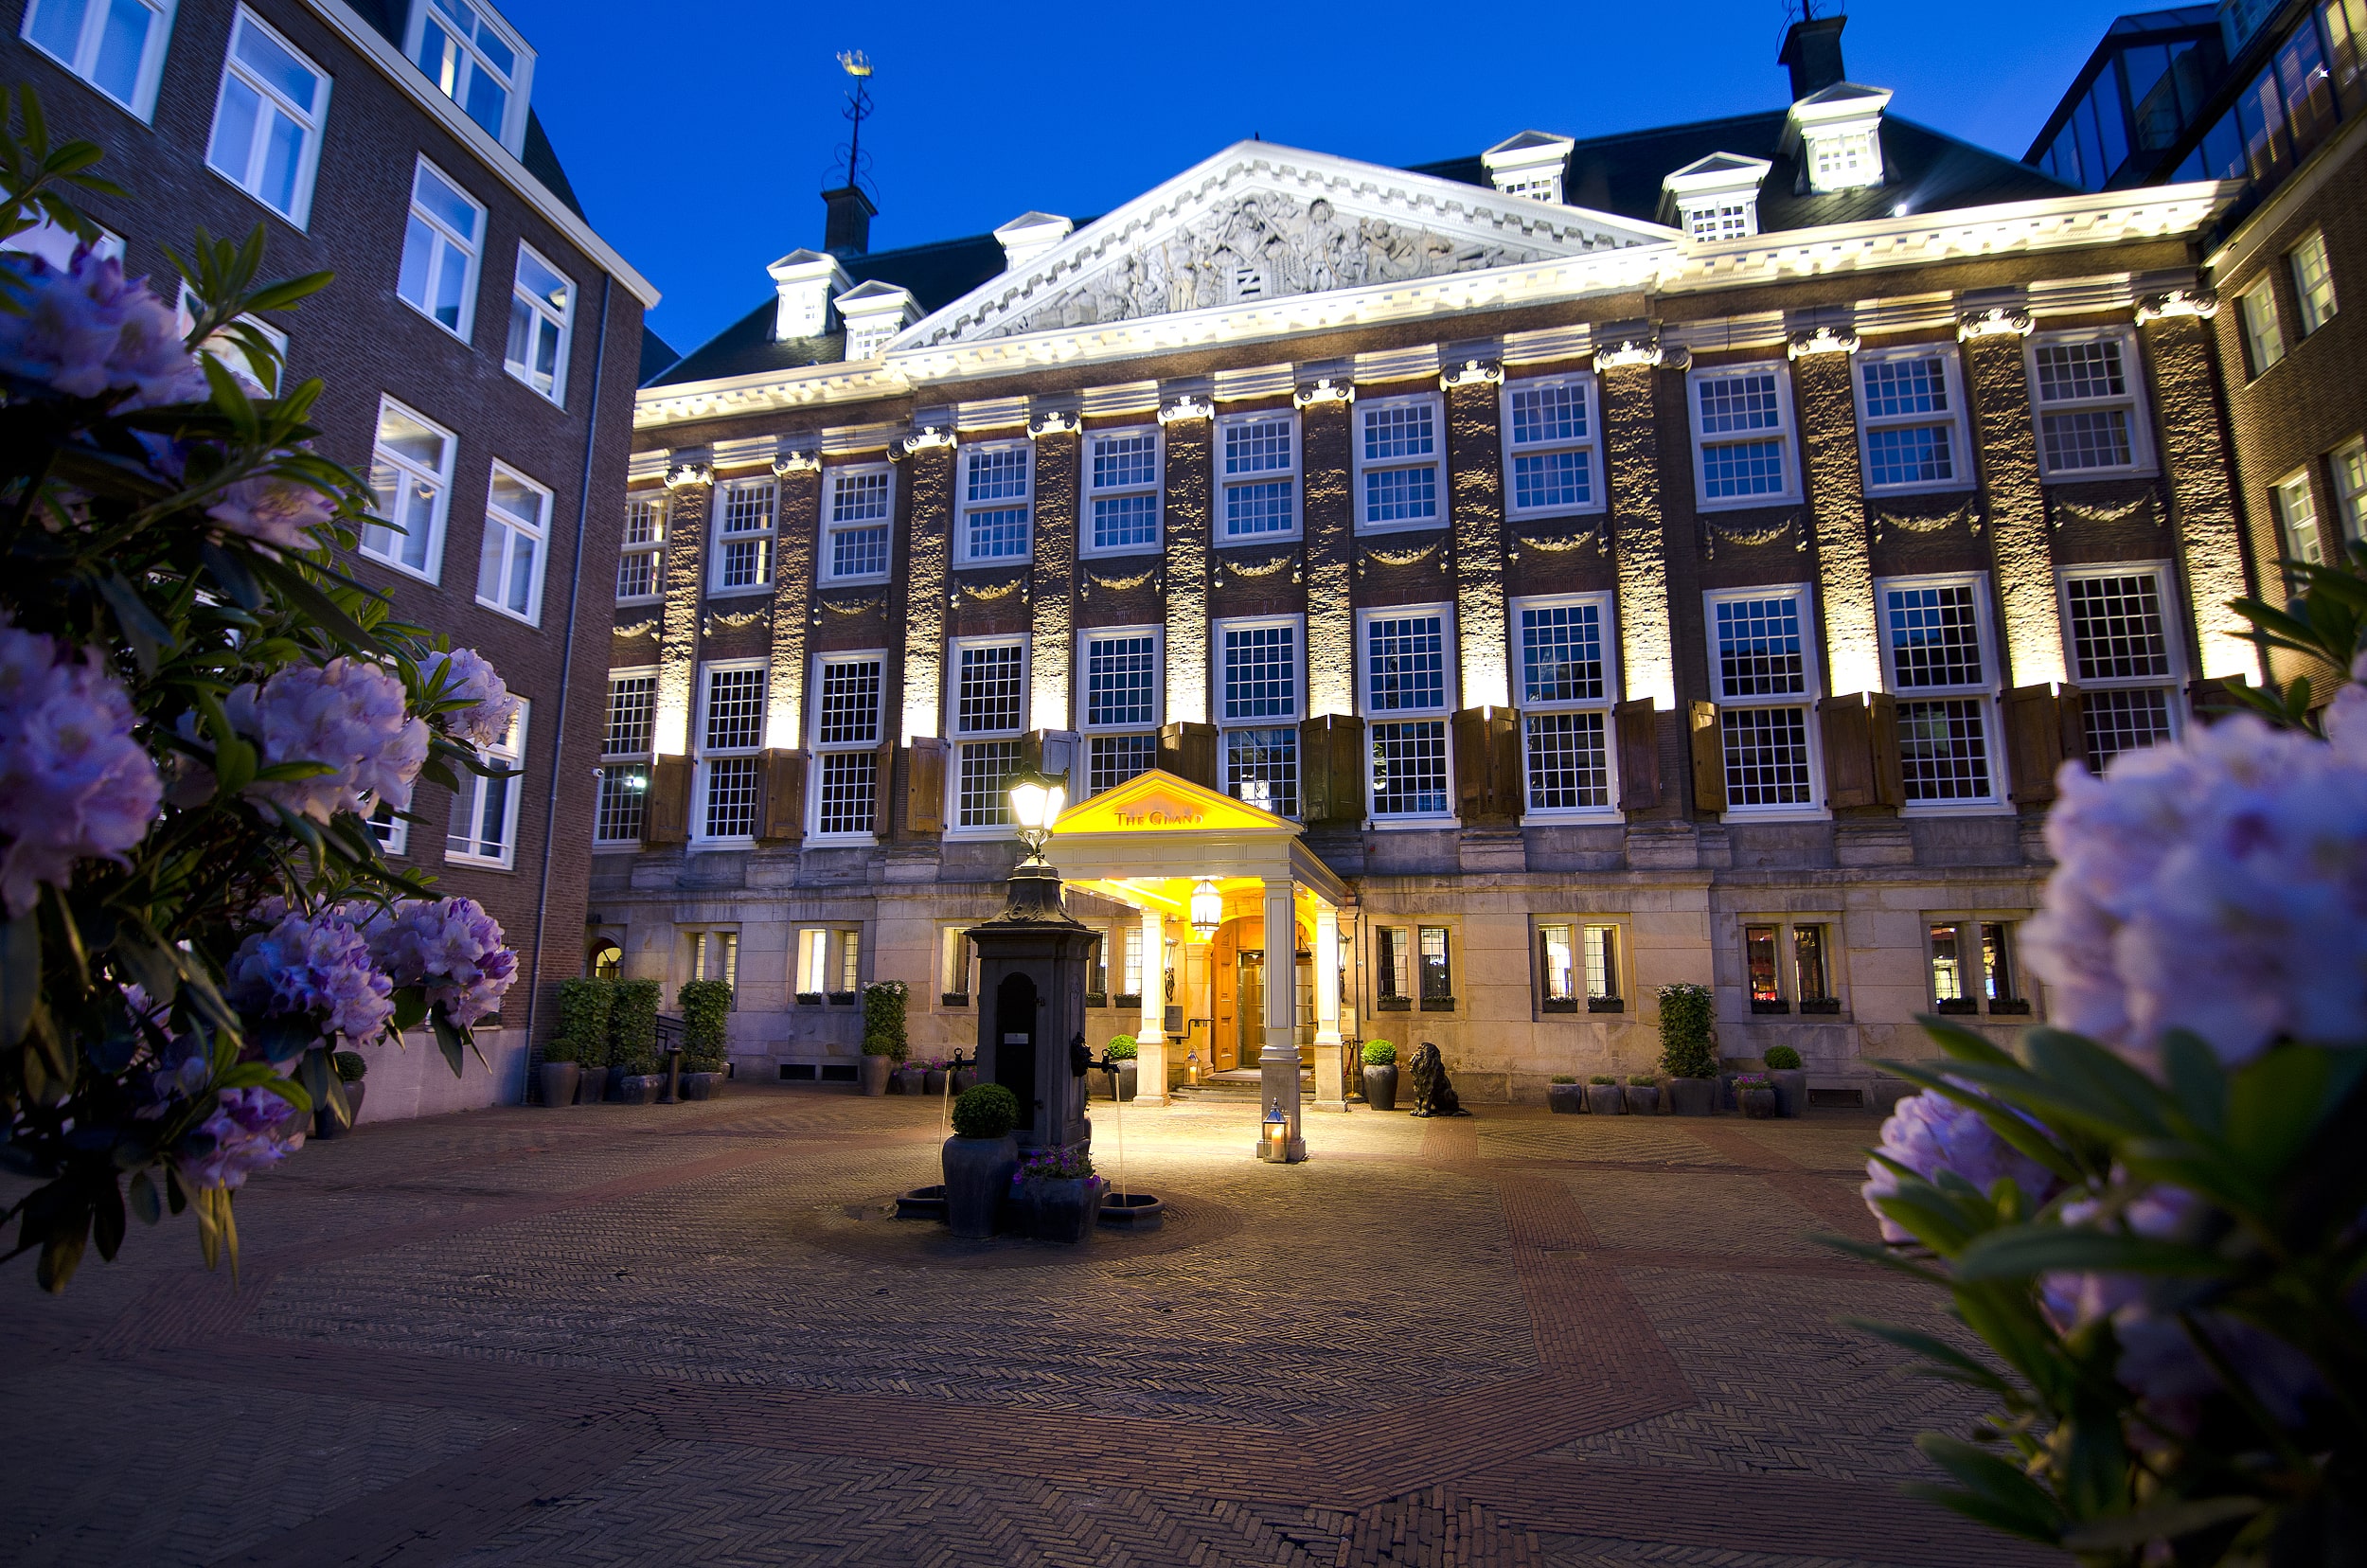 Sofitel Legend The Grand Amsterdam <br/>406.67 ew <br/> <a href='http://vakantieoplossing.nl/outpage/?id=fa1546294706935f8503d8b1c0ce7f59' target='_blank'>View Details</a>